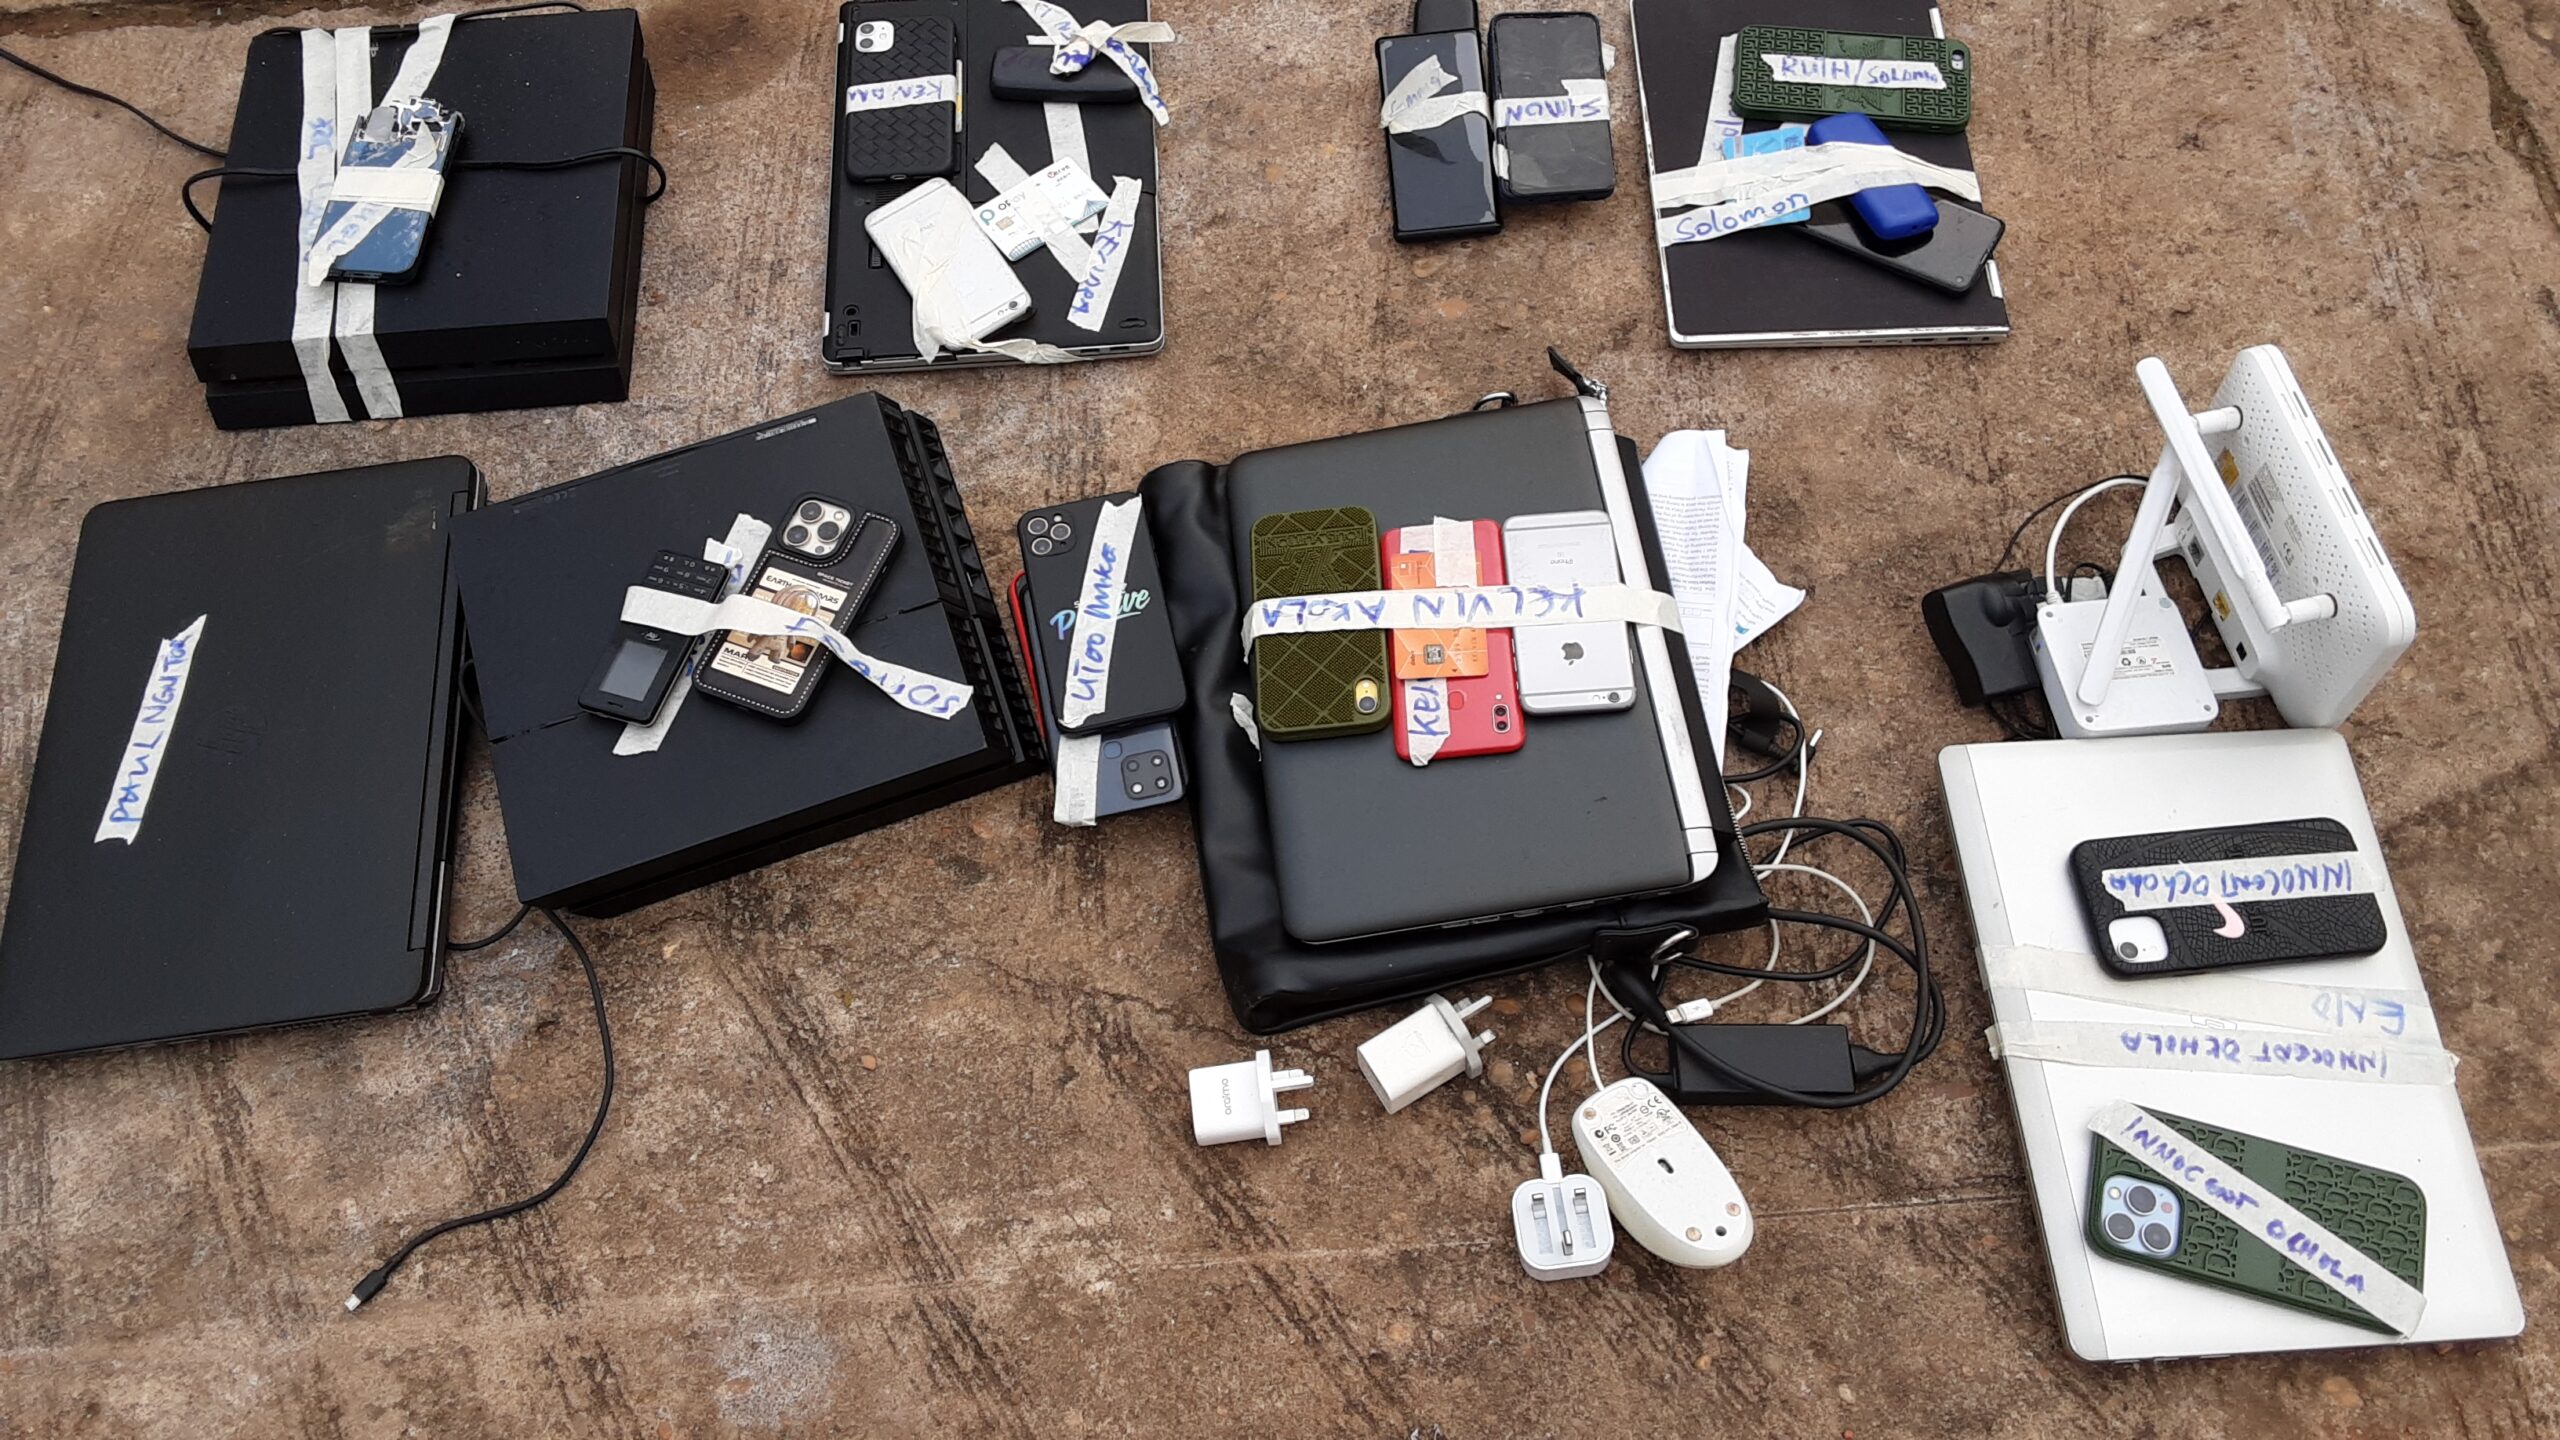 EFCC busts 'Yahoo-Yahoo' hideout, arrests14 suspects